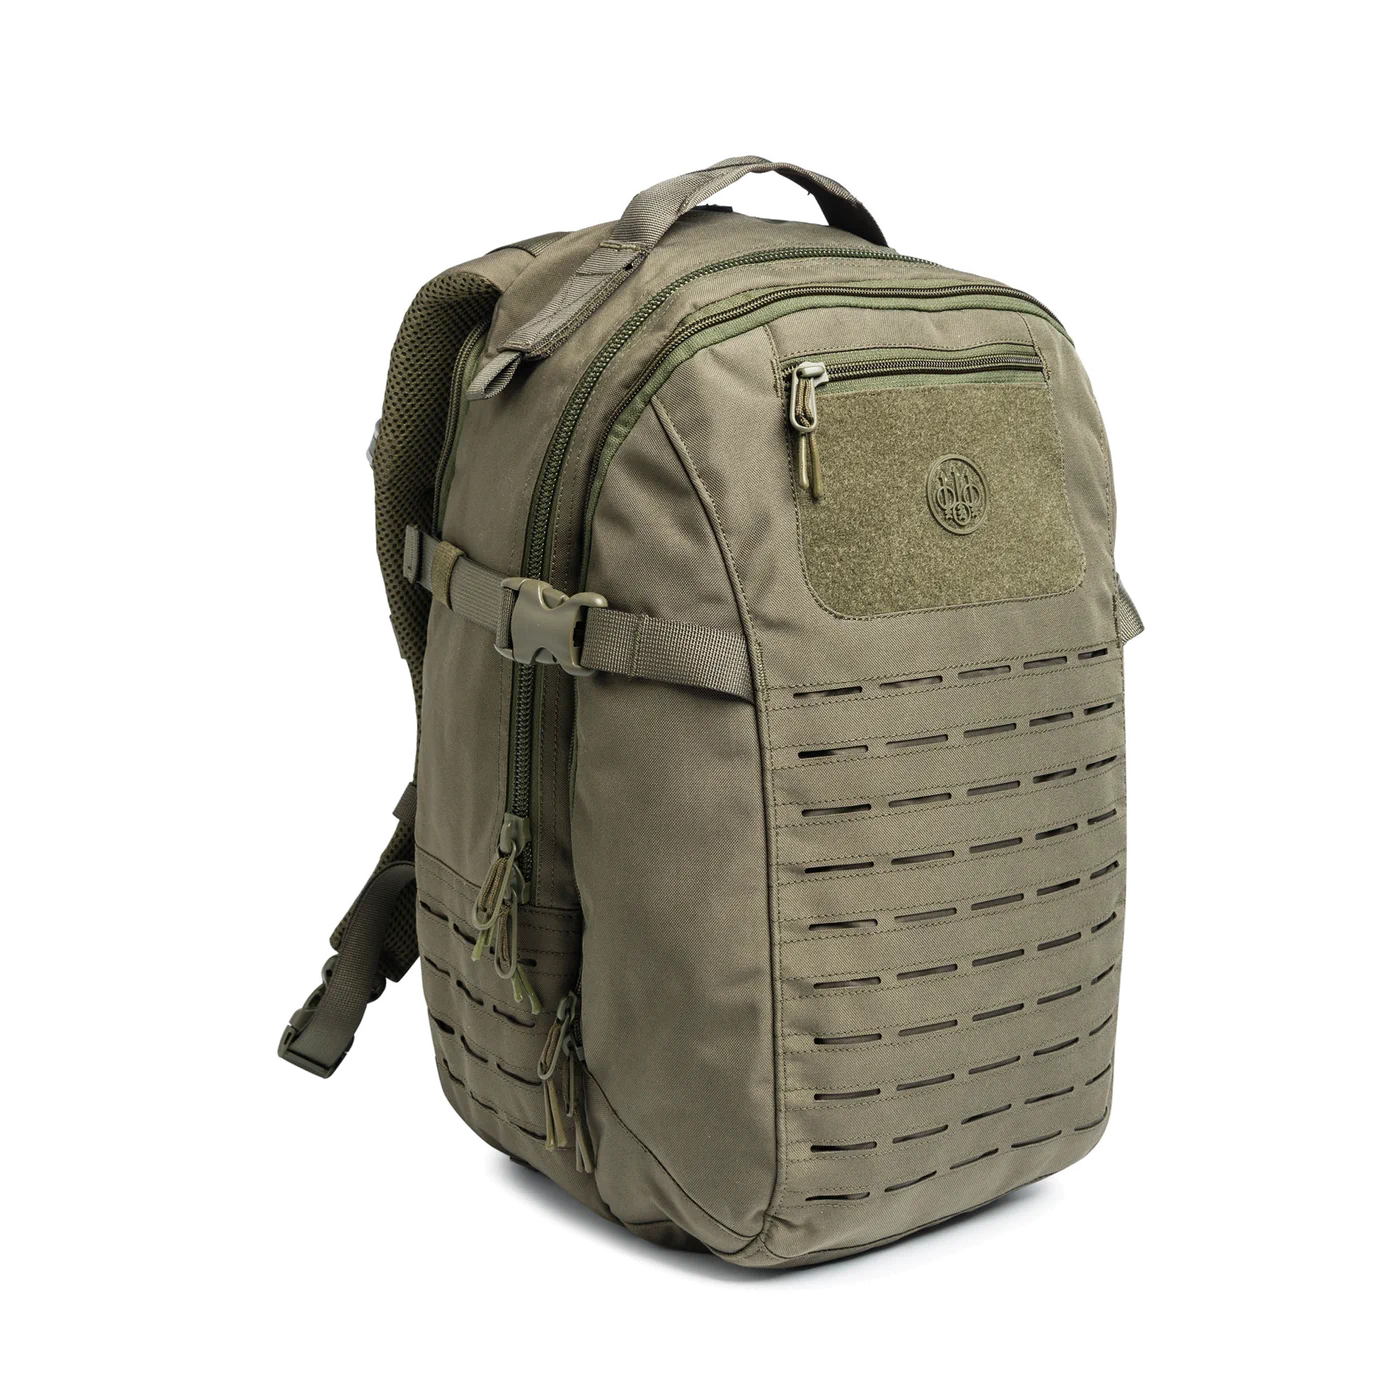 Green Backpack w/ padded rifle compartment,new Cactus Jack Tactical Assault O.D 